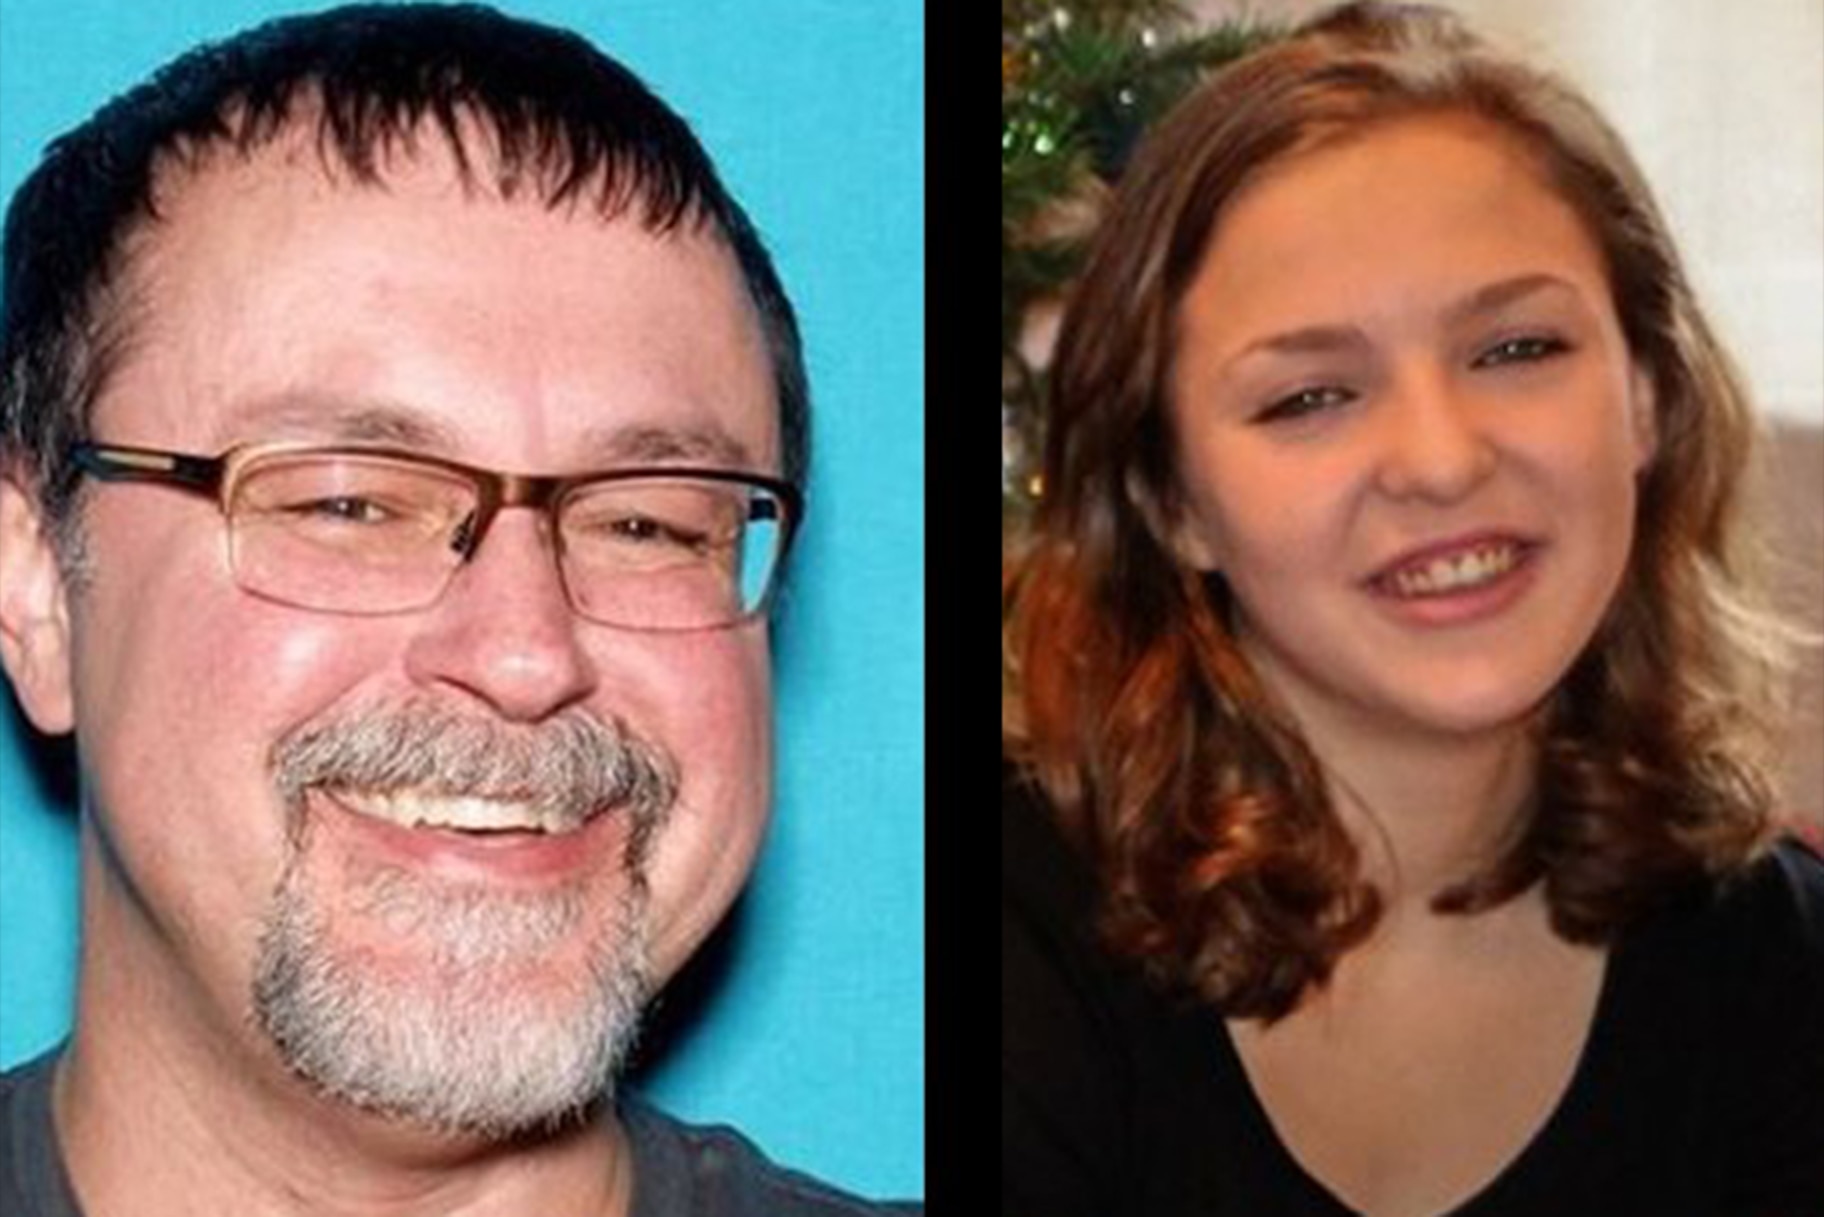 Missing Teenager Allegedly Taken By Teacher Now Has “wife” In Her 